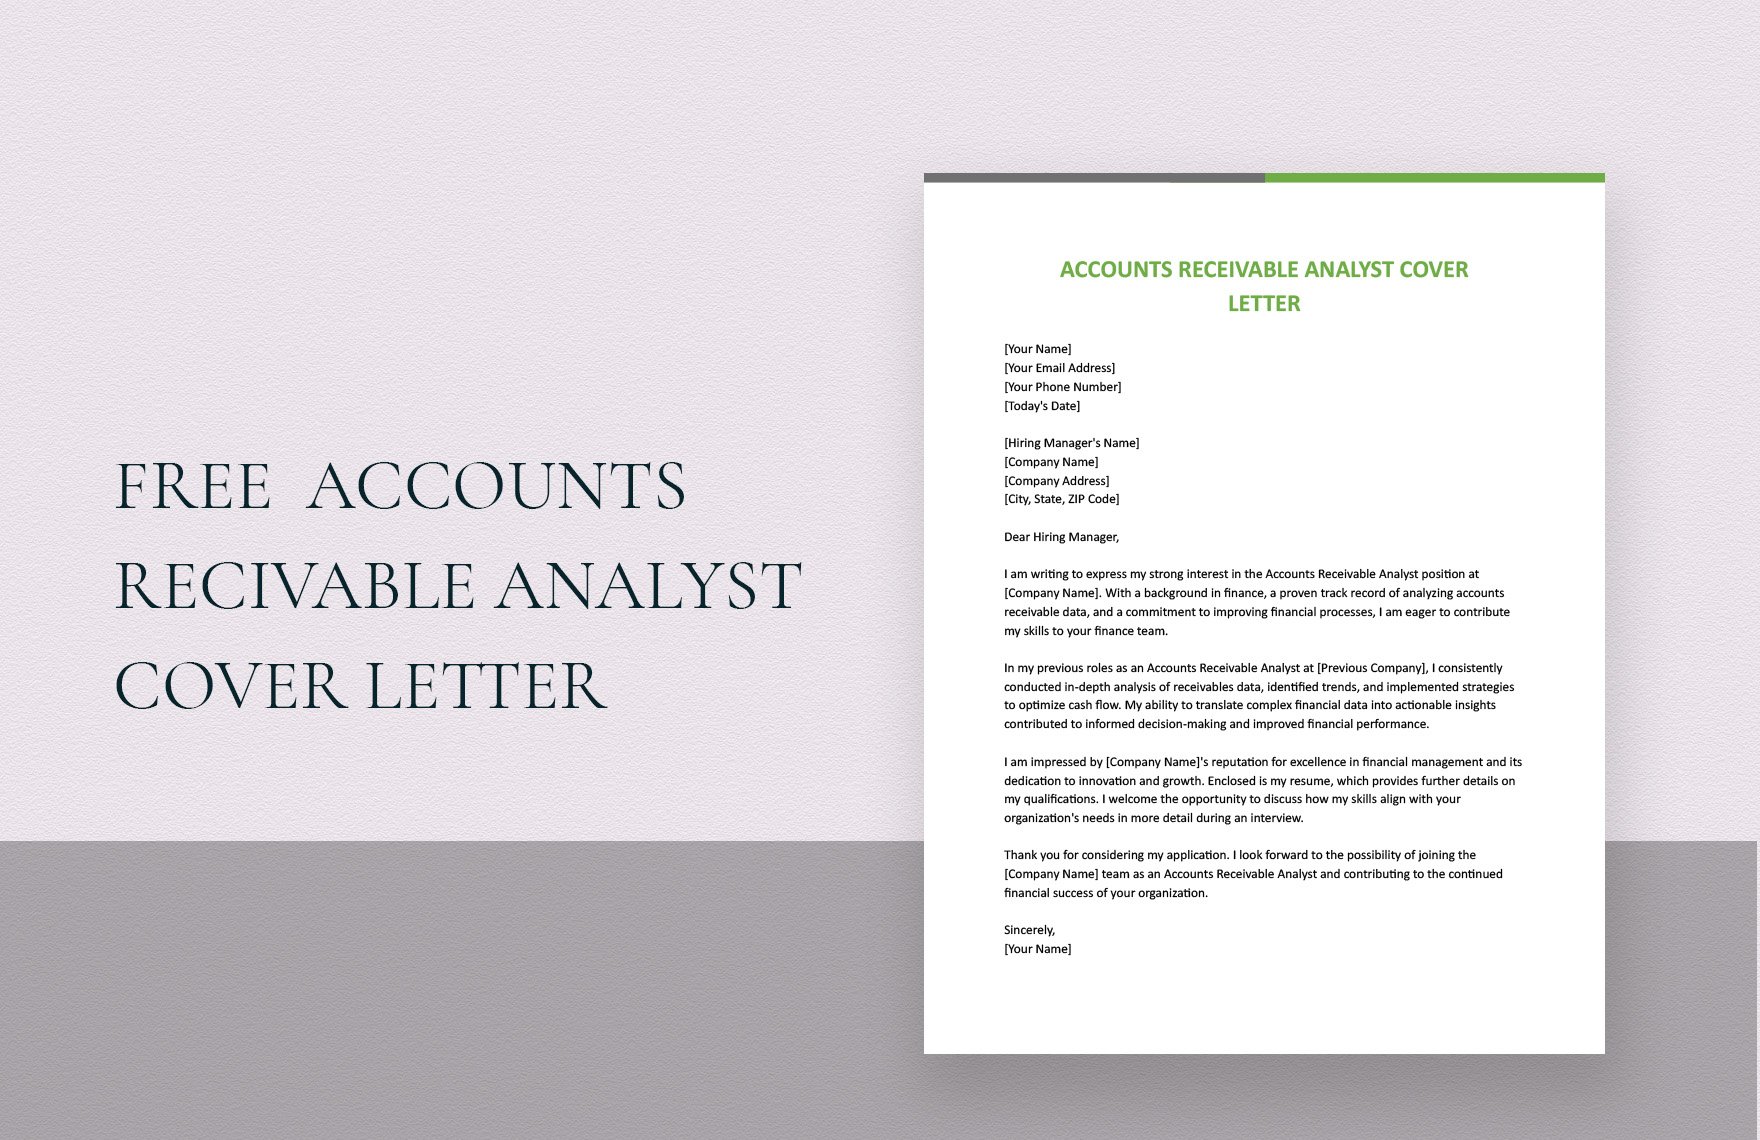 Accounts Receivable Analyst Cover Letter